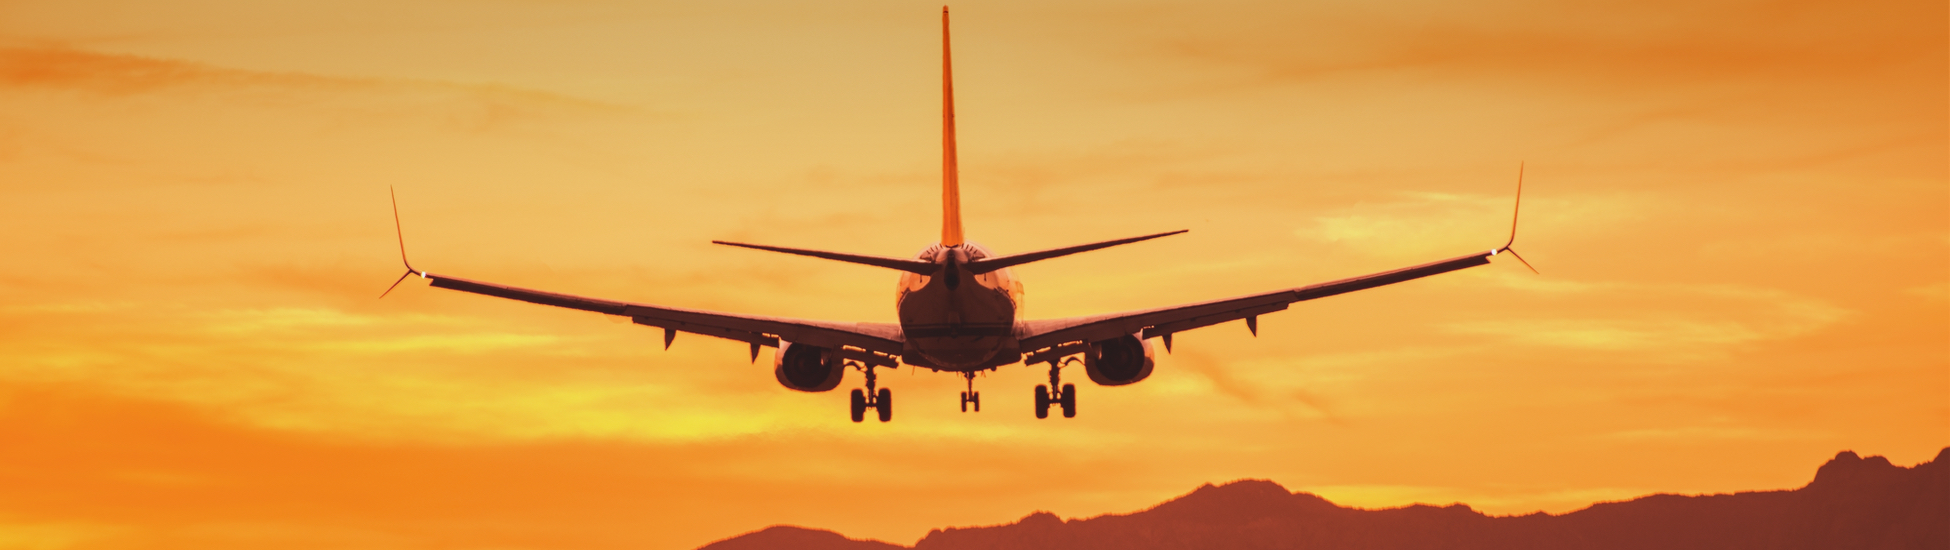 Image of a plane landing with a orange sunset in the background